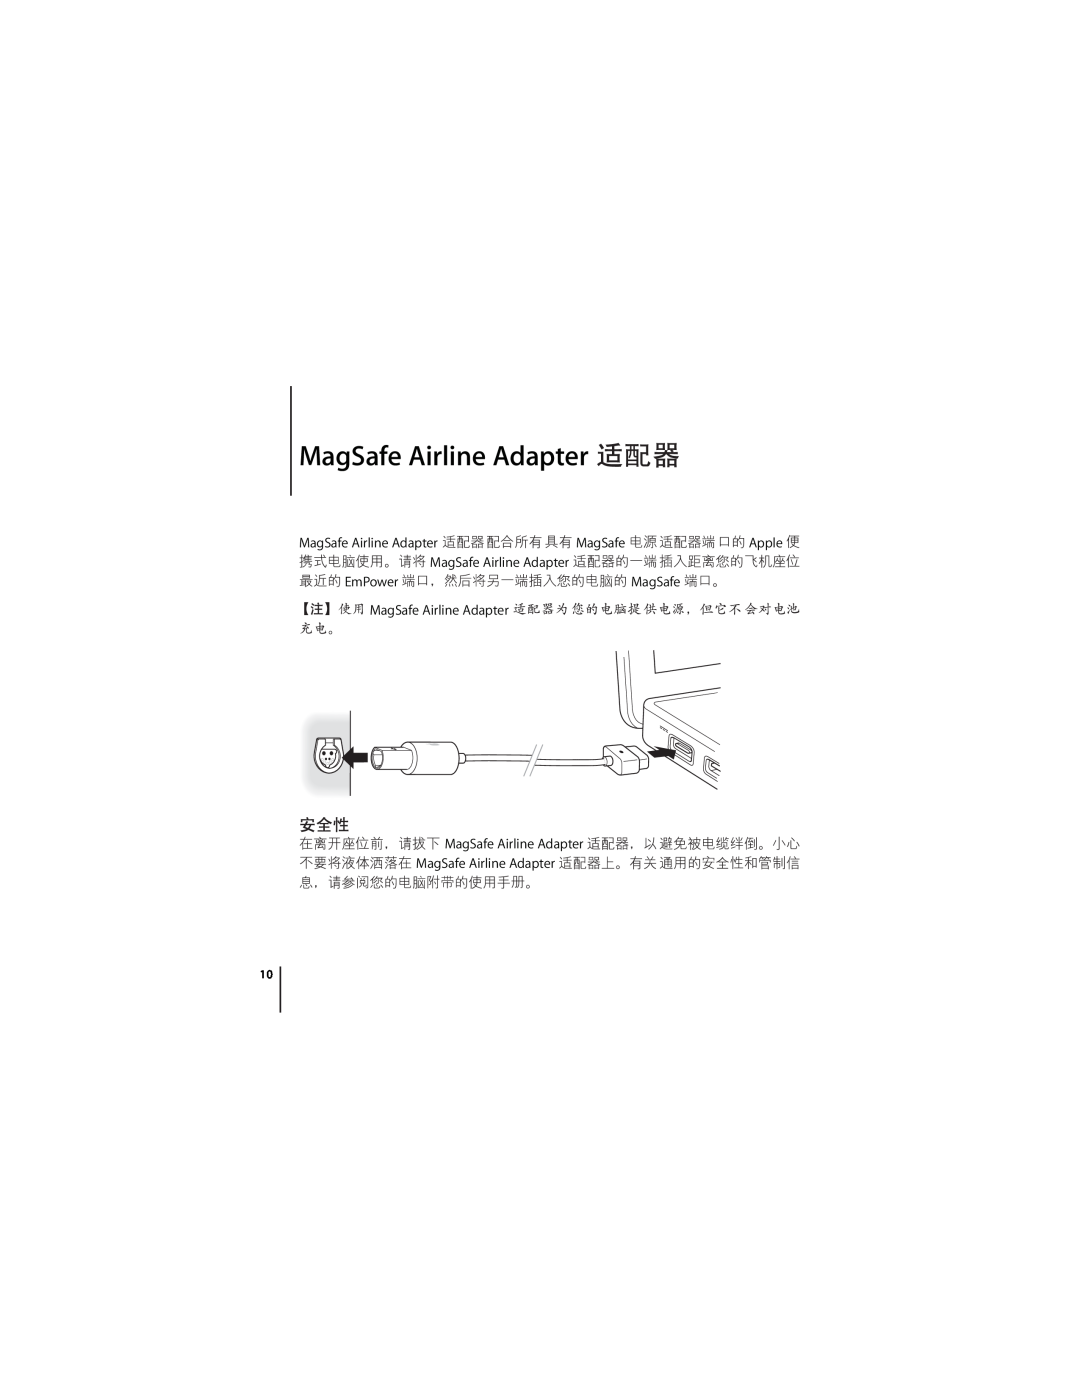 Apple manual MagSafe Airline Adapter MagSafe Apple MagSafe Airline Adapter, EmPower MagSafe MagSafe Airline Adapter 